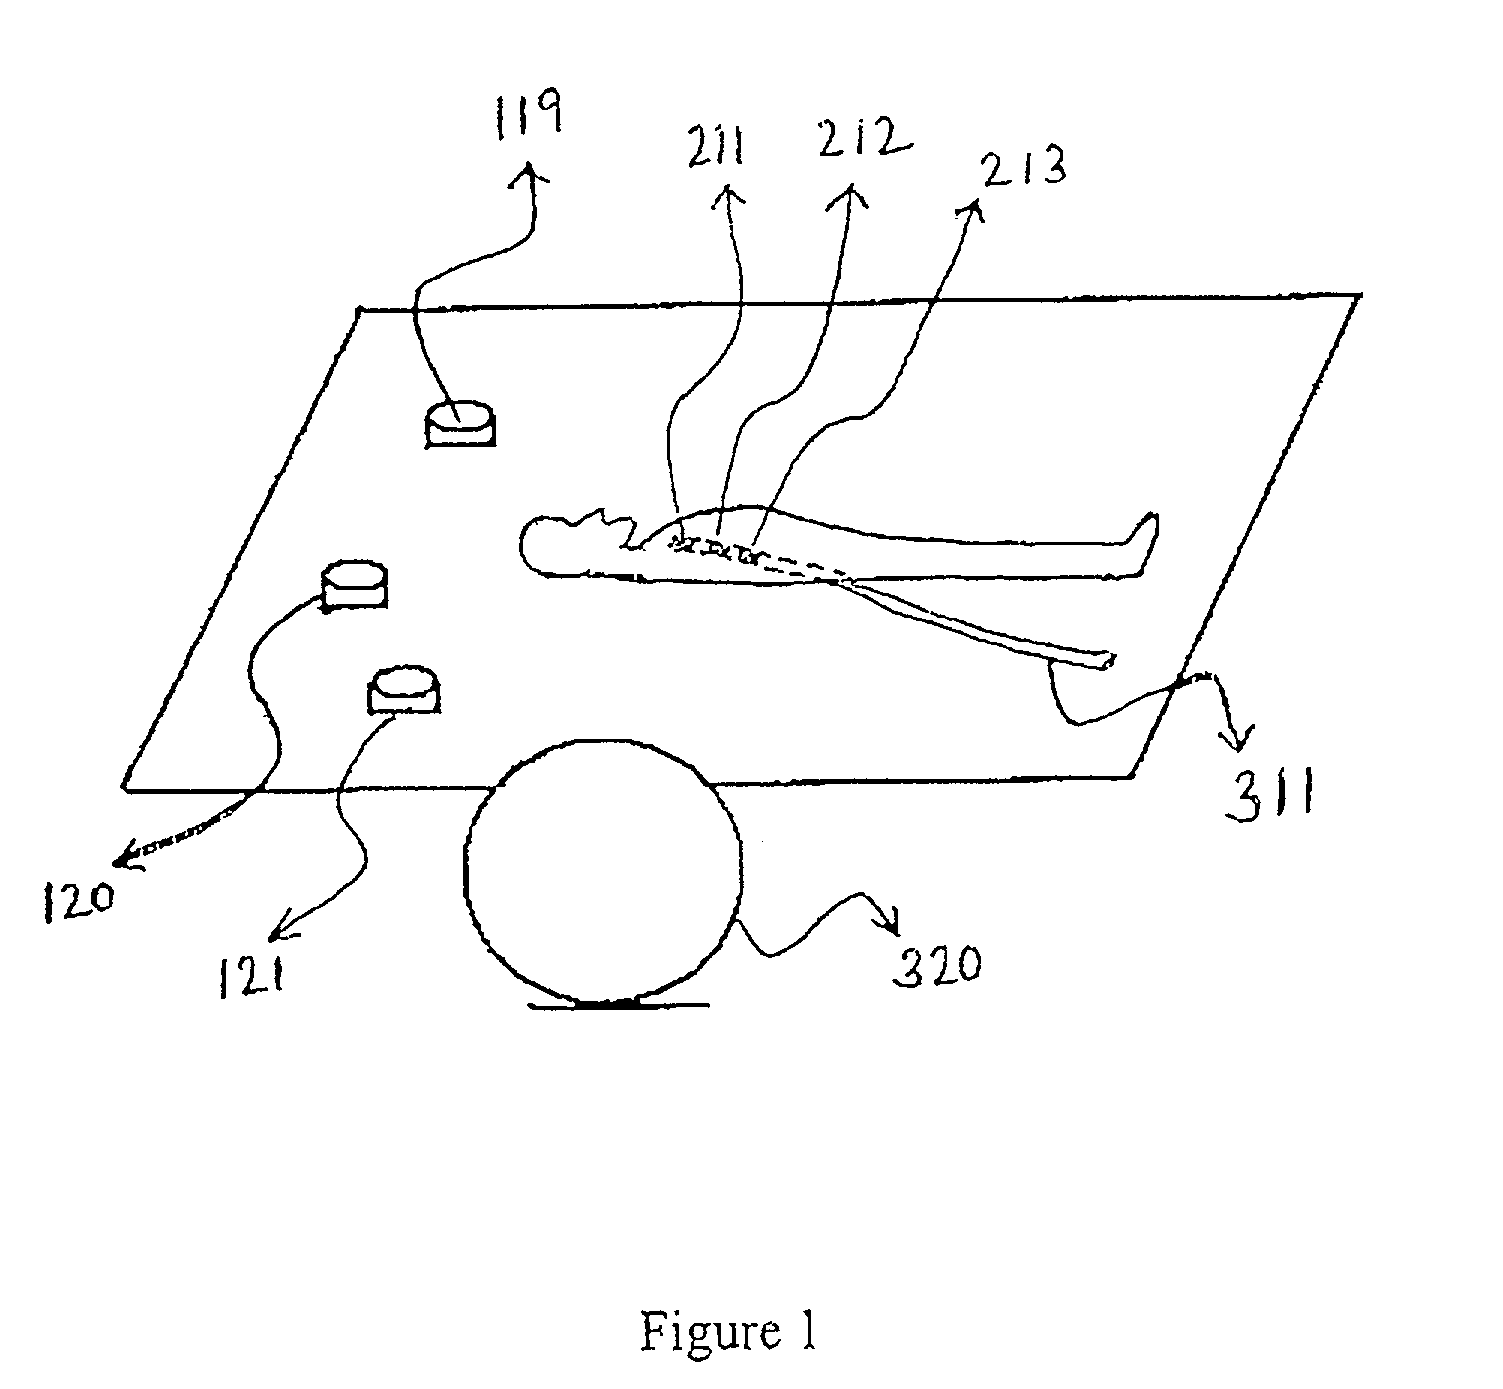 Method and apparatus for refinably accurate localization of devices and instruments in scattering environments